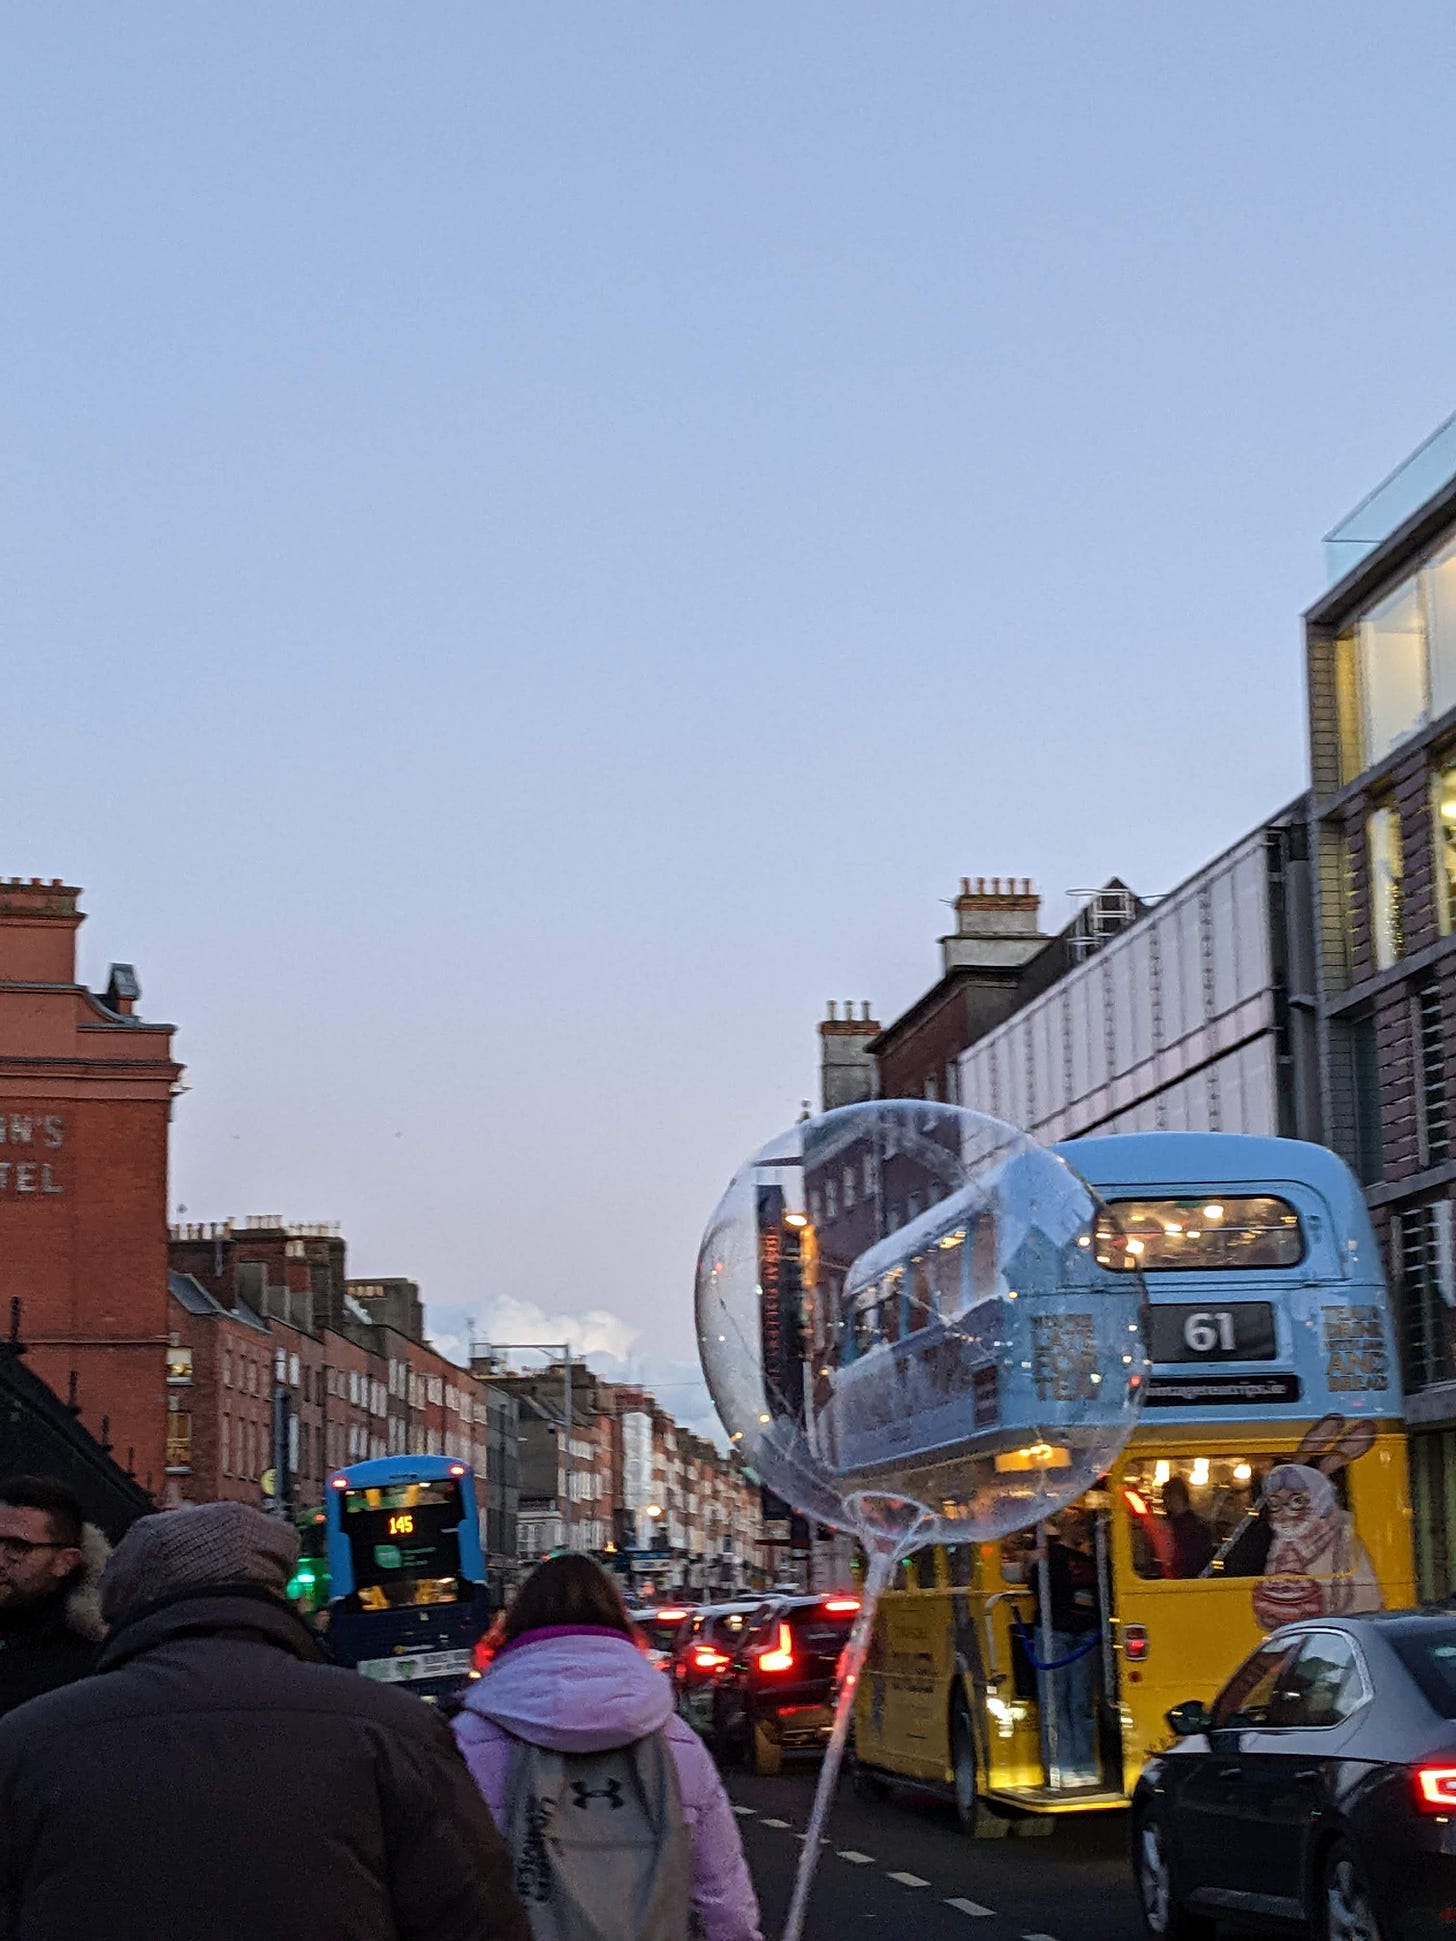 a busy city street—buses, cars, buildings—at winter dusk. in the foreground a child walking away from the camera carries a transparent, iridescent balloon that is at the center of the image and distorts the view through it very slightly.